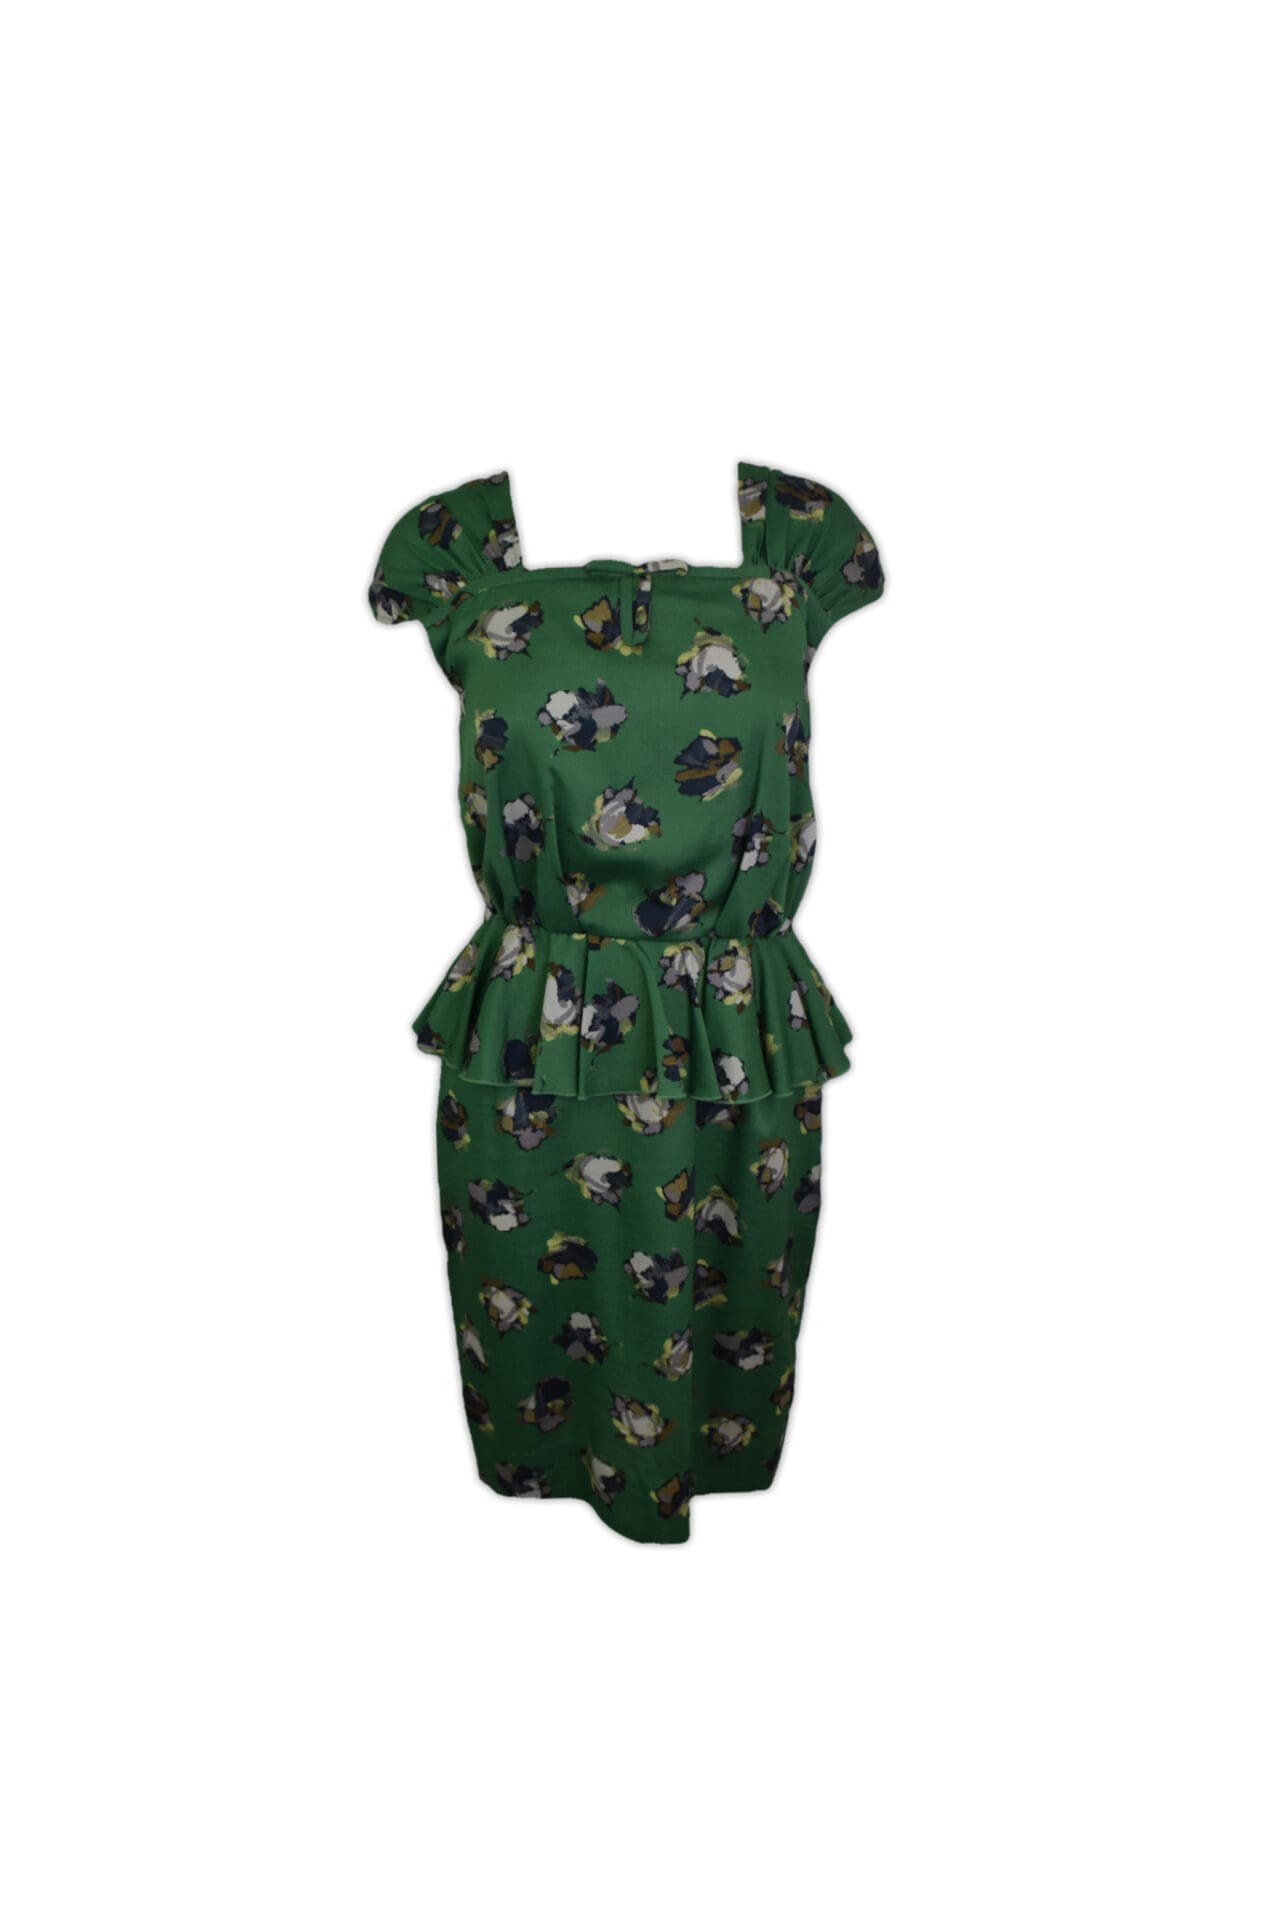 Green floral print, small, work dress with sweetheart neckline